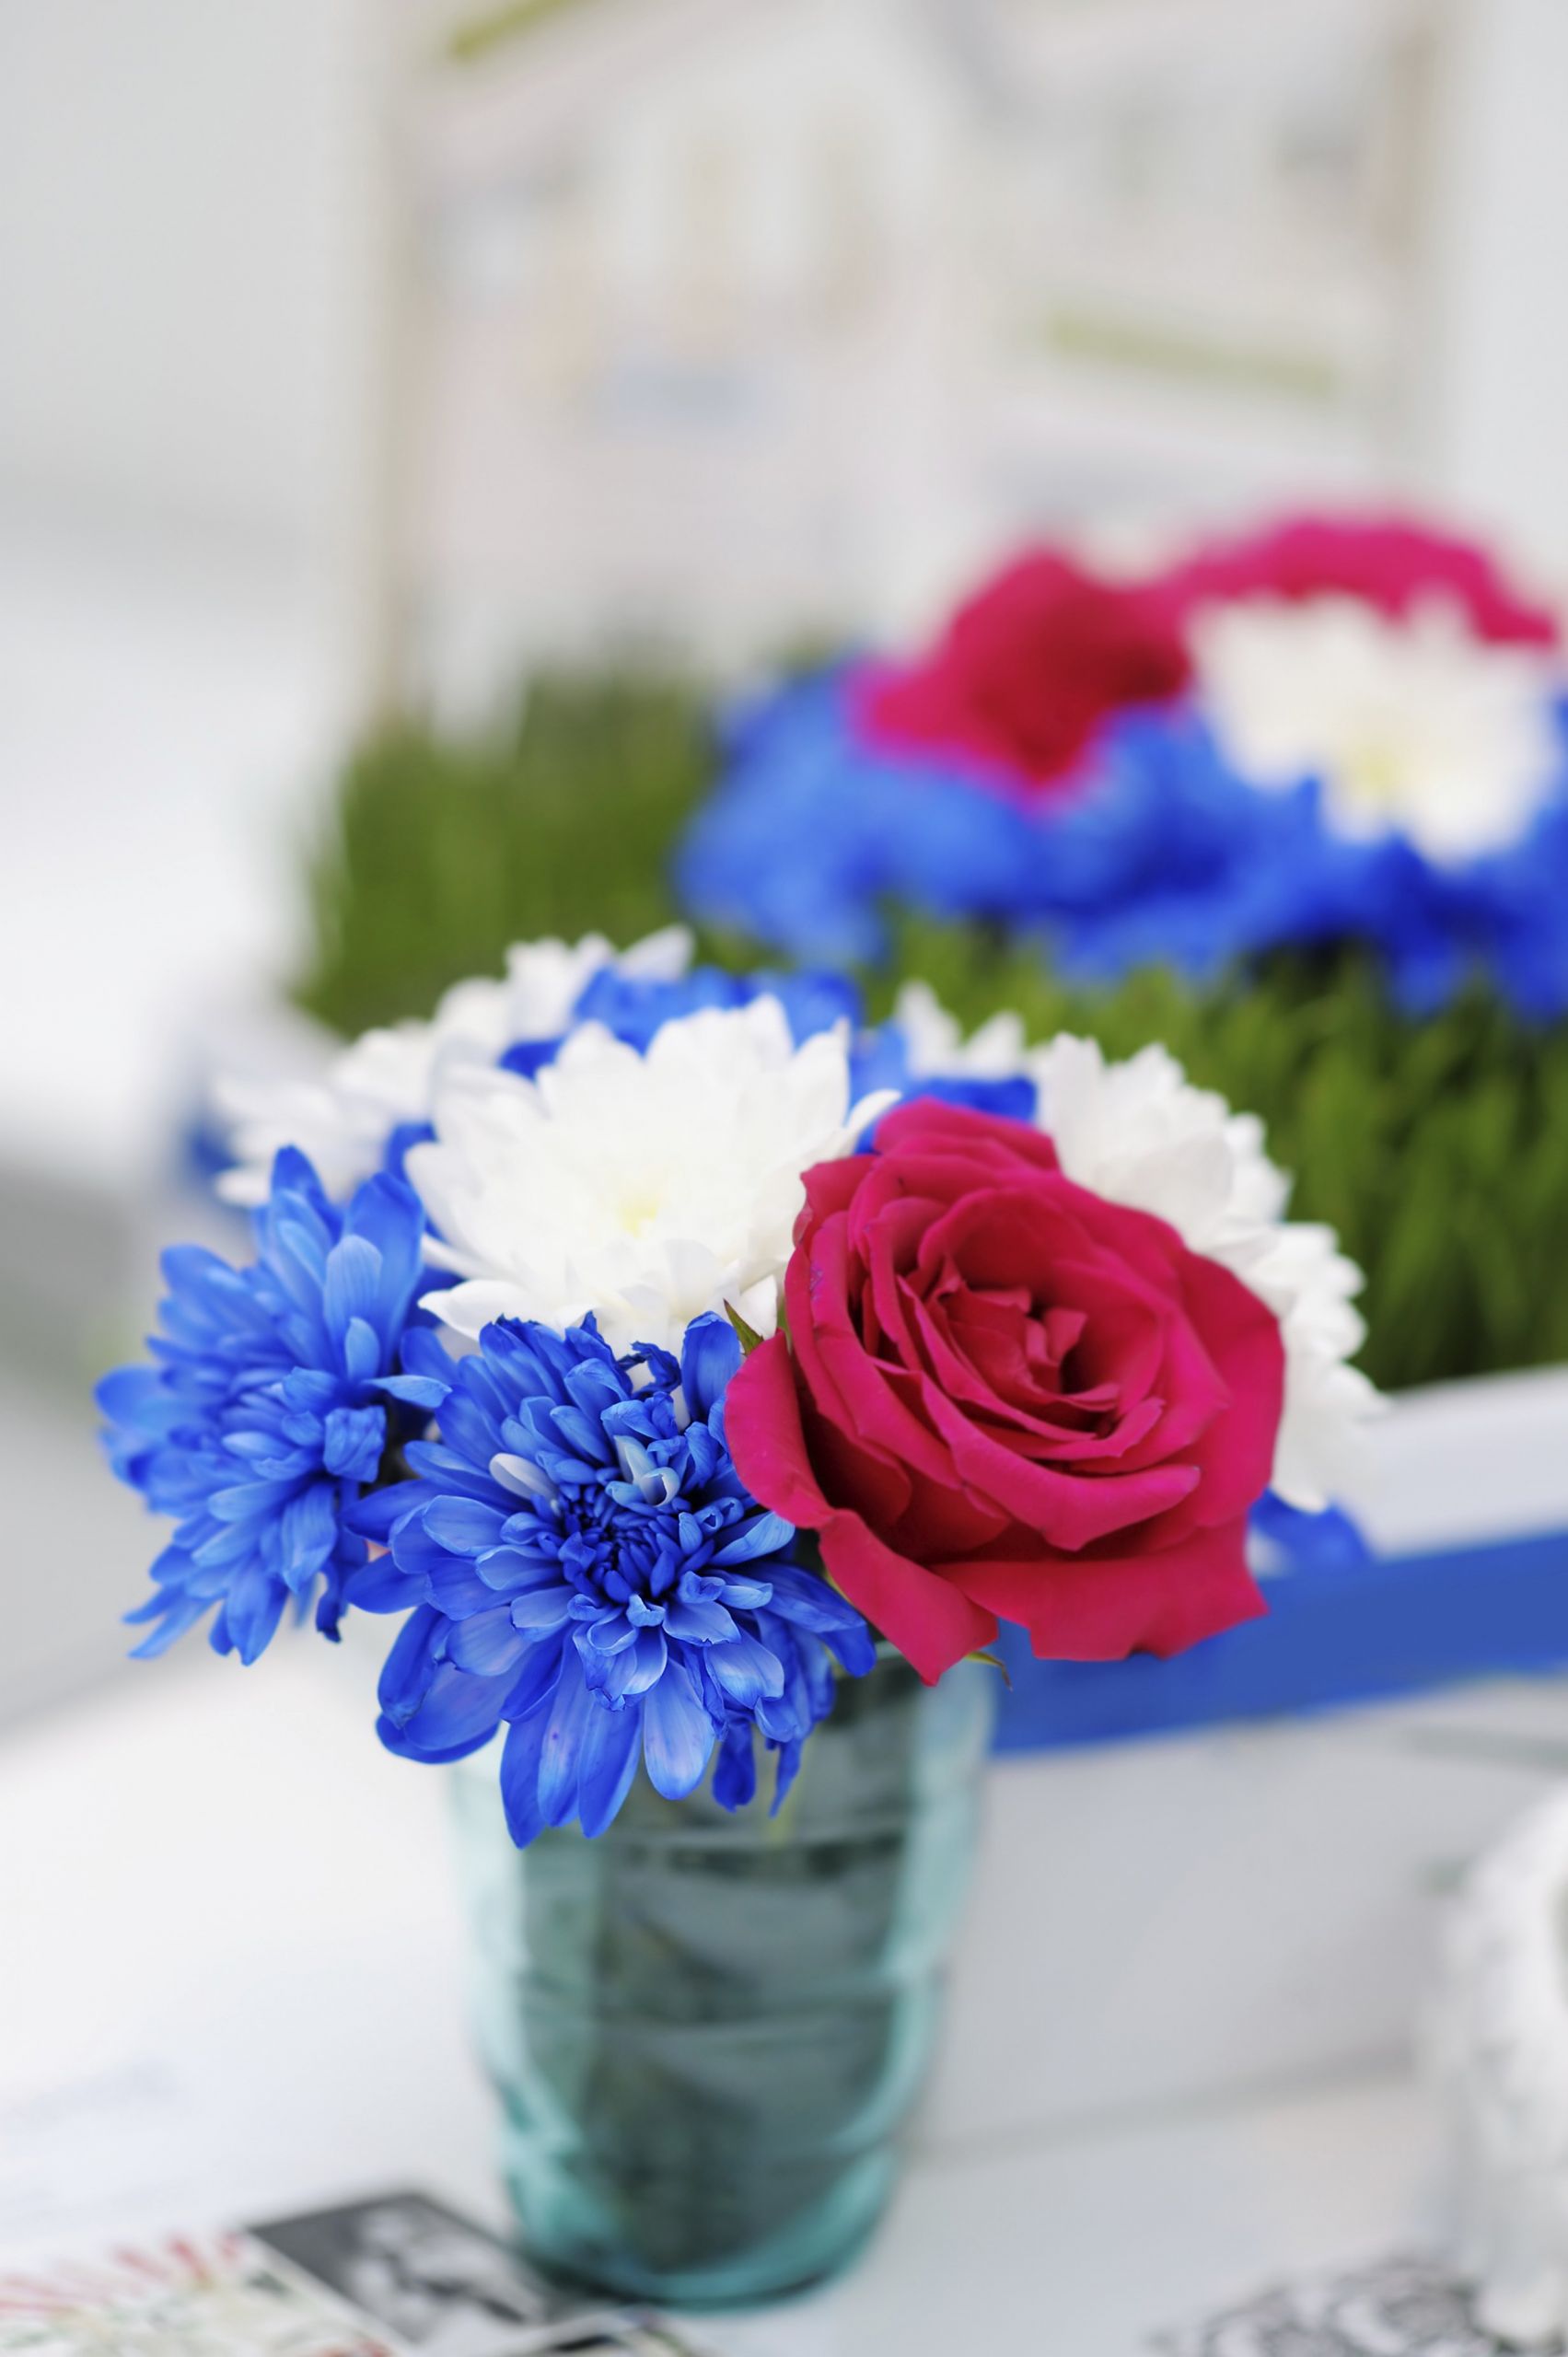 Memorial Day Flower Ideas
 Ideas for Memorial Day Flower Arrangements with